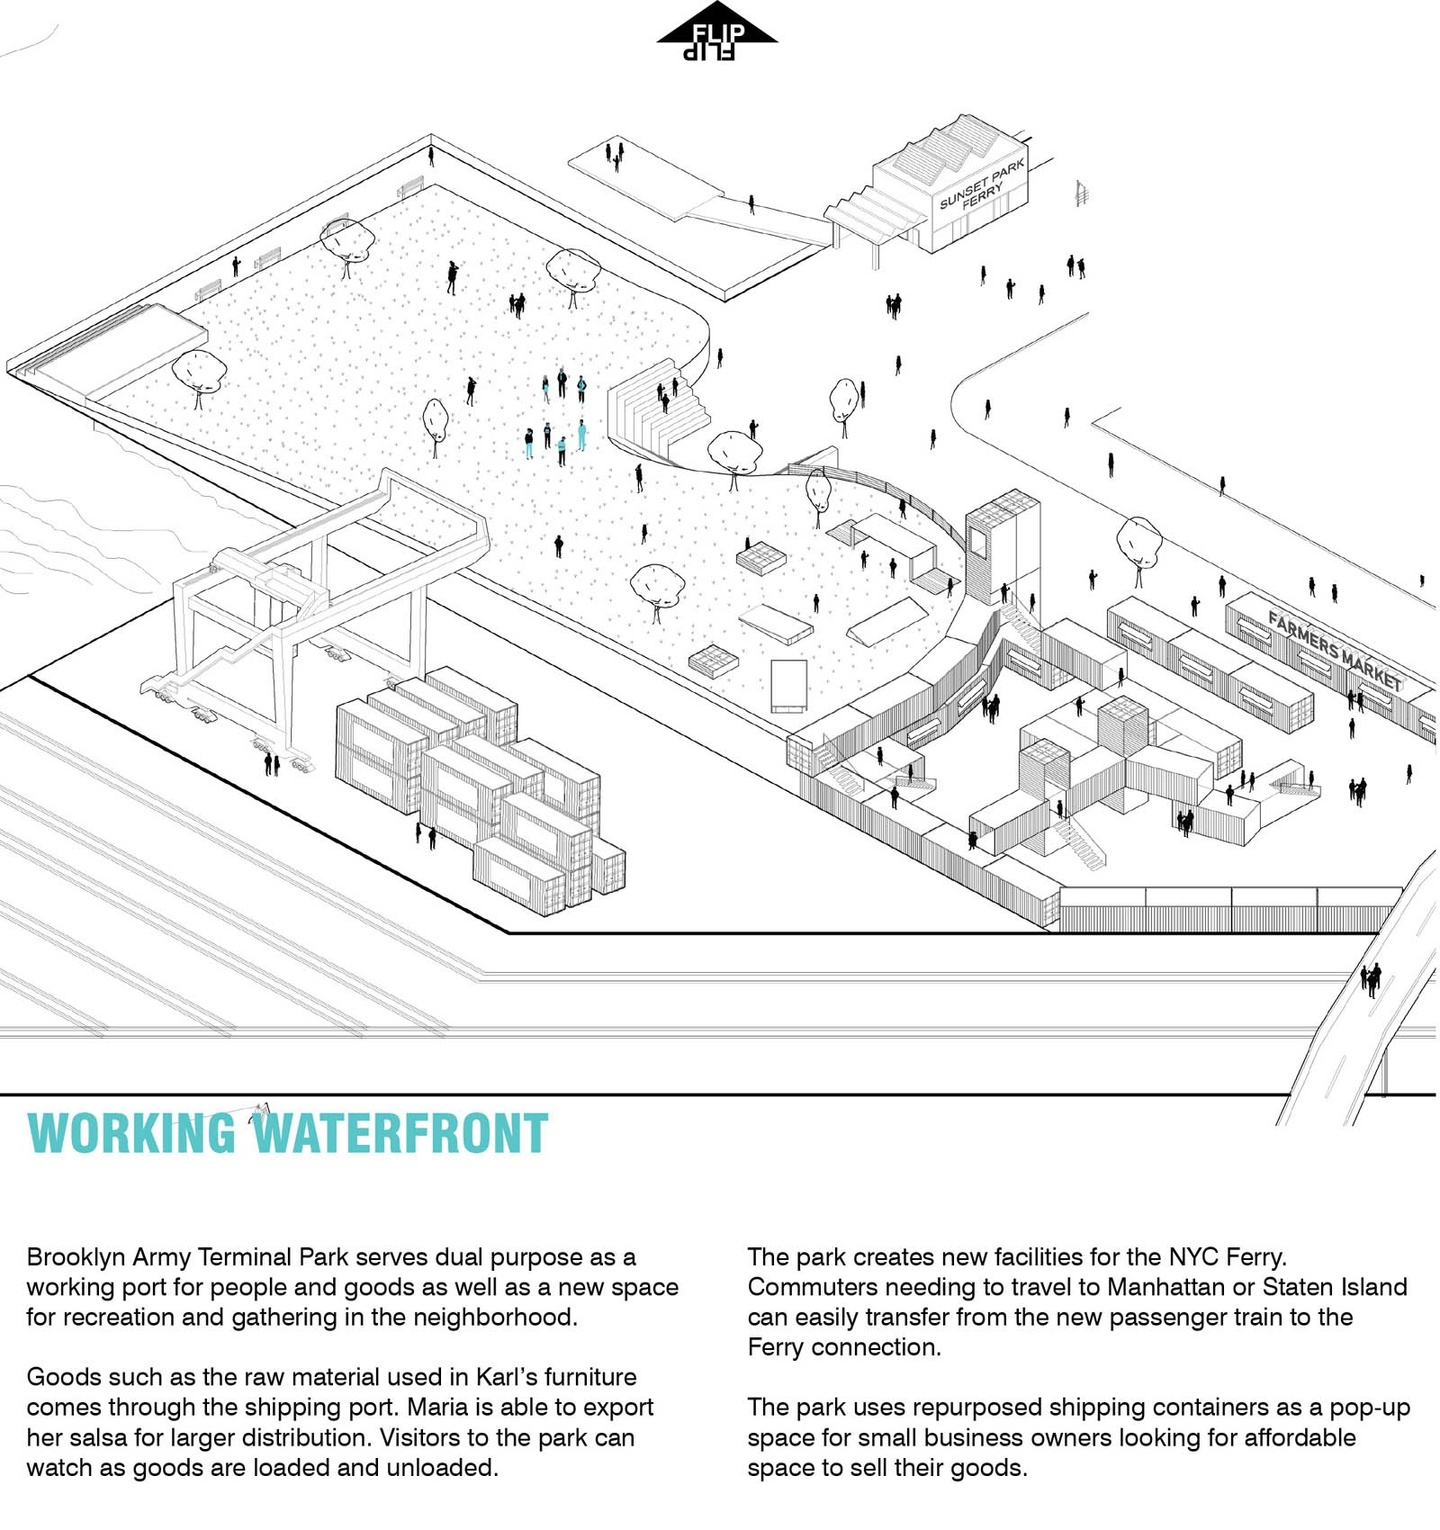 Diagram and infographic for the Brooklyn Army Terminal Park